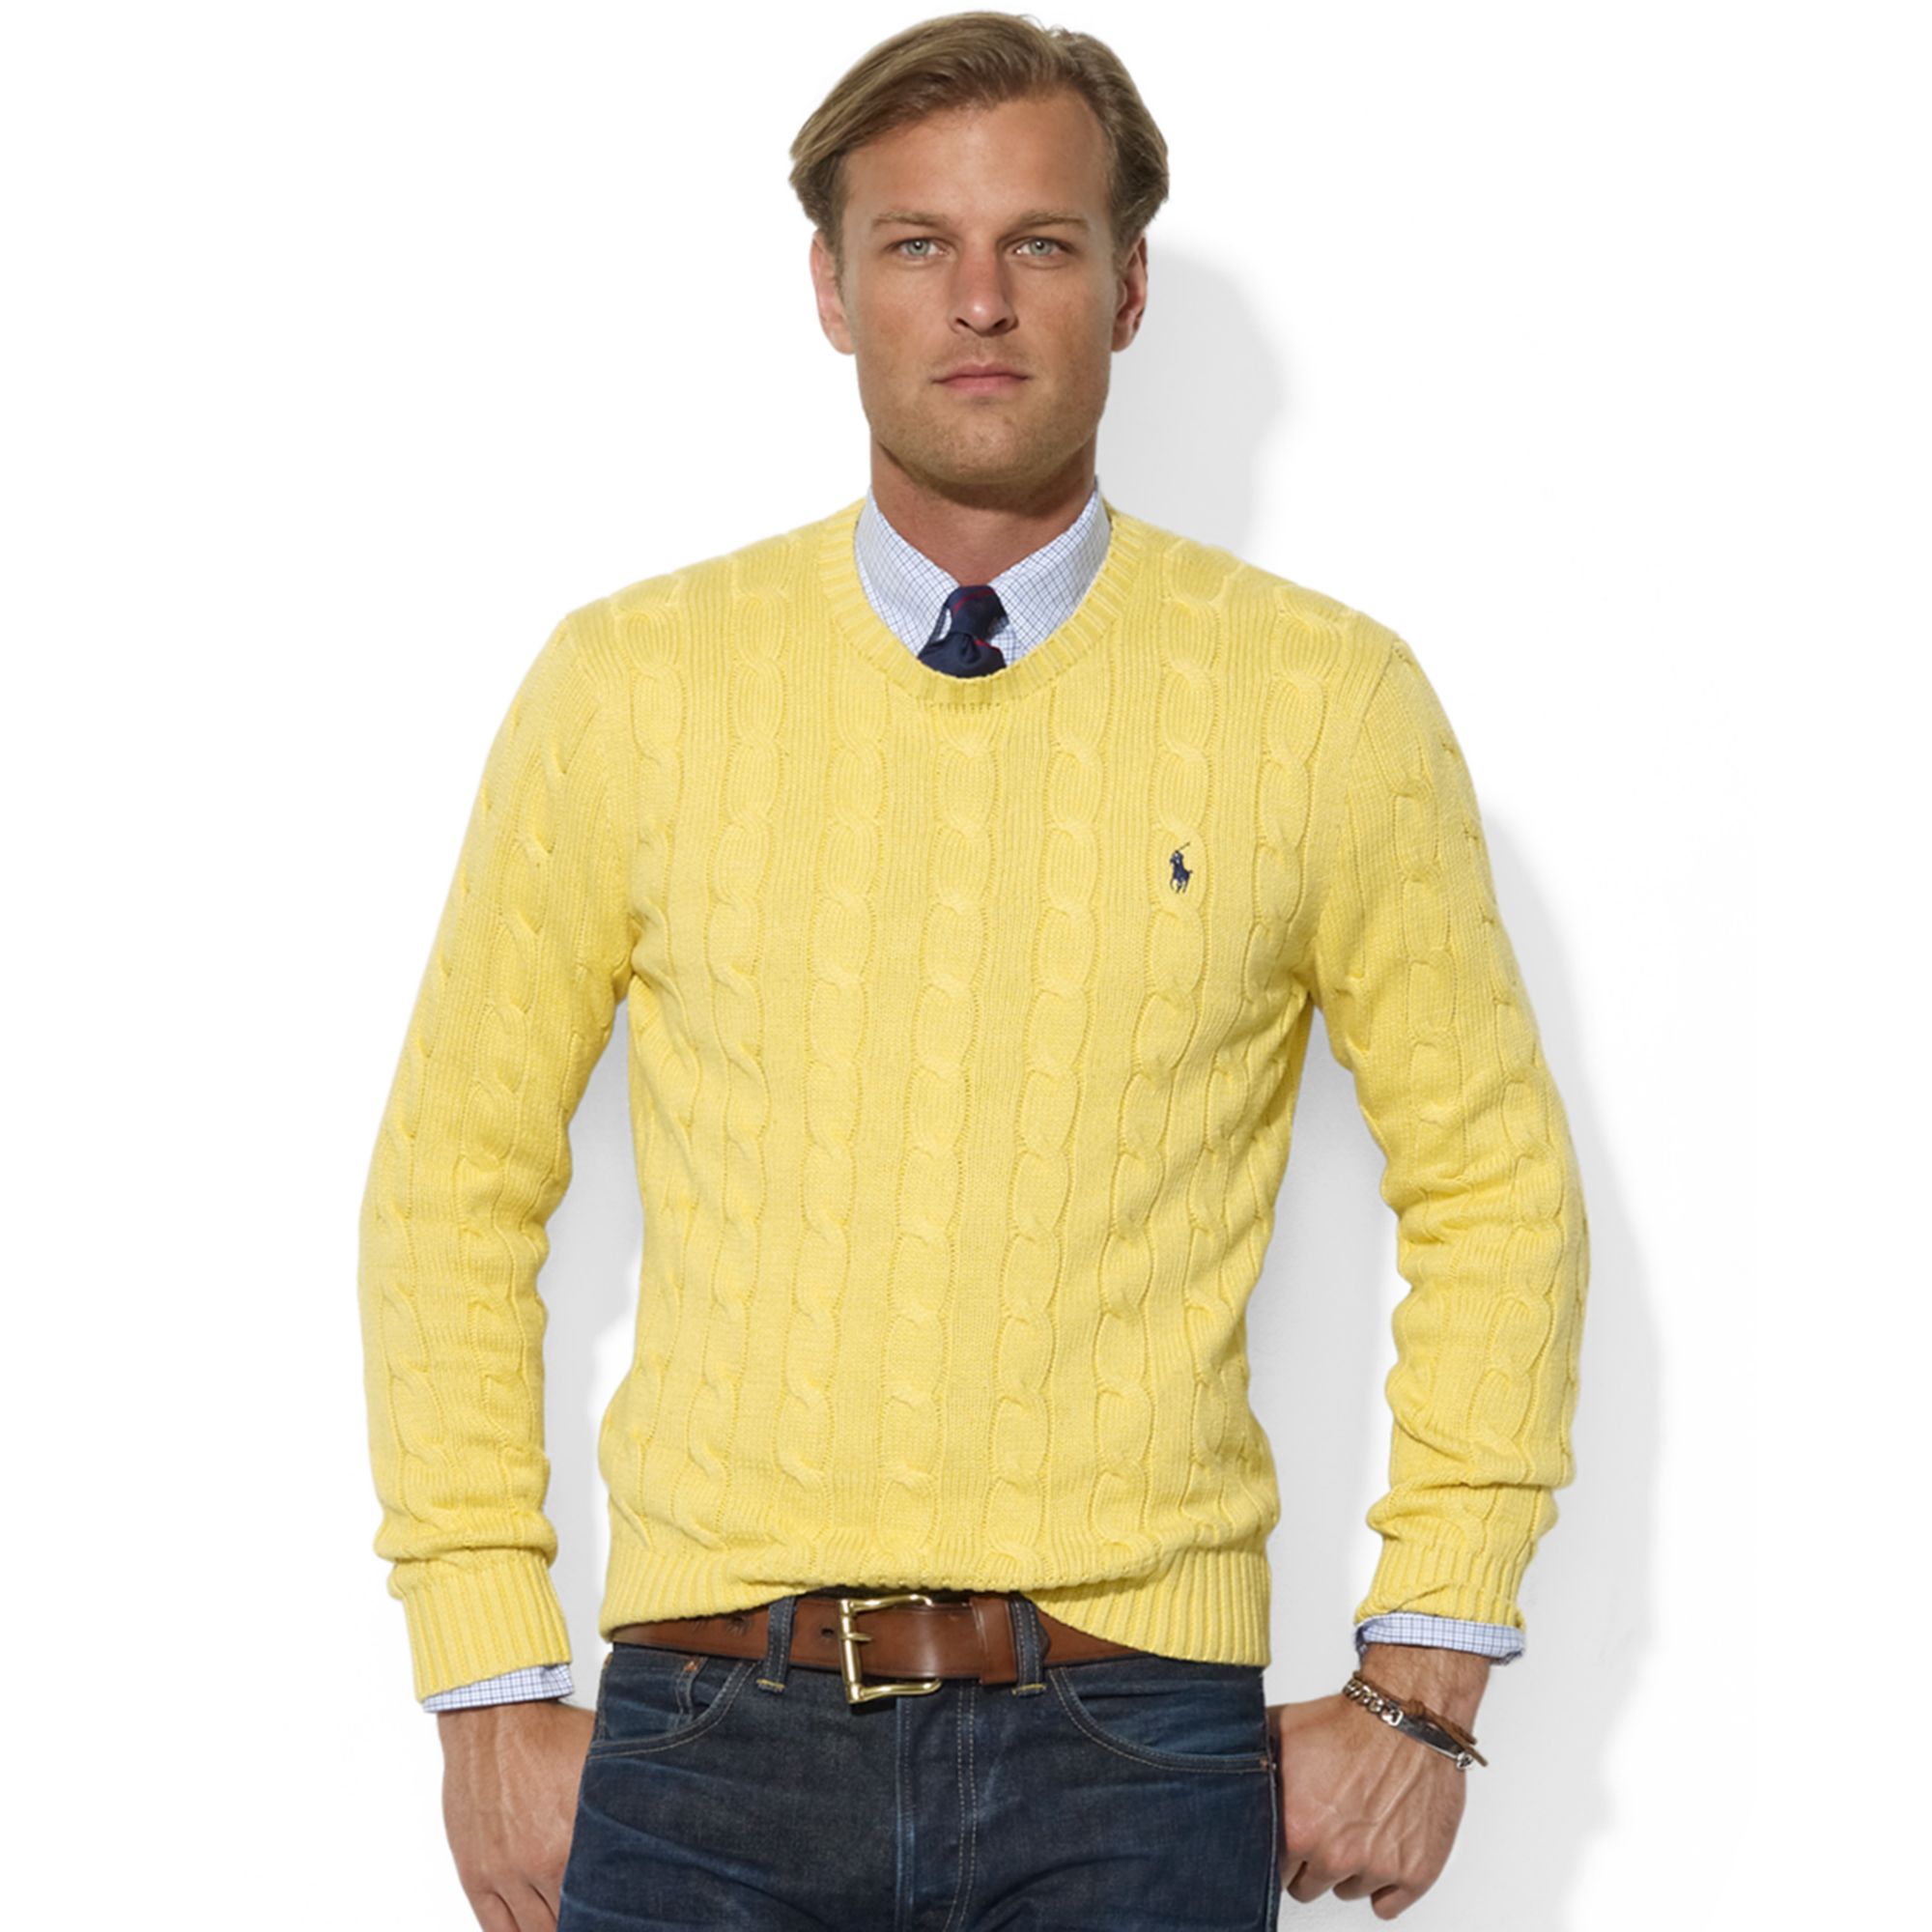 Ralph Lauren Roving Crew Neck Cable Cotton Sweater in Yellow for Men - Lyst